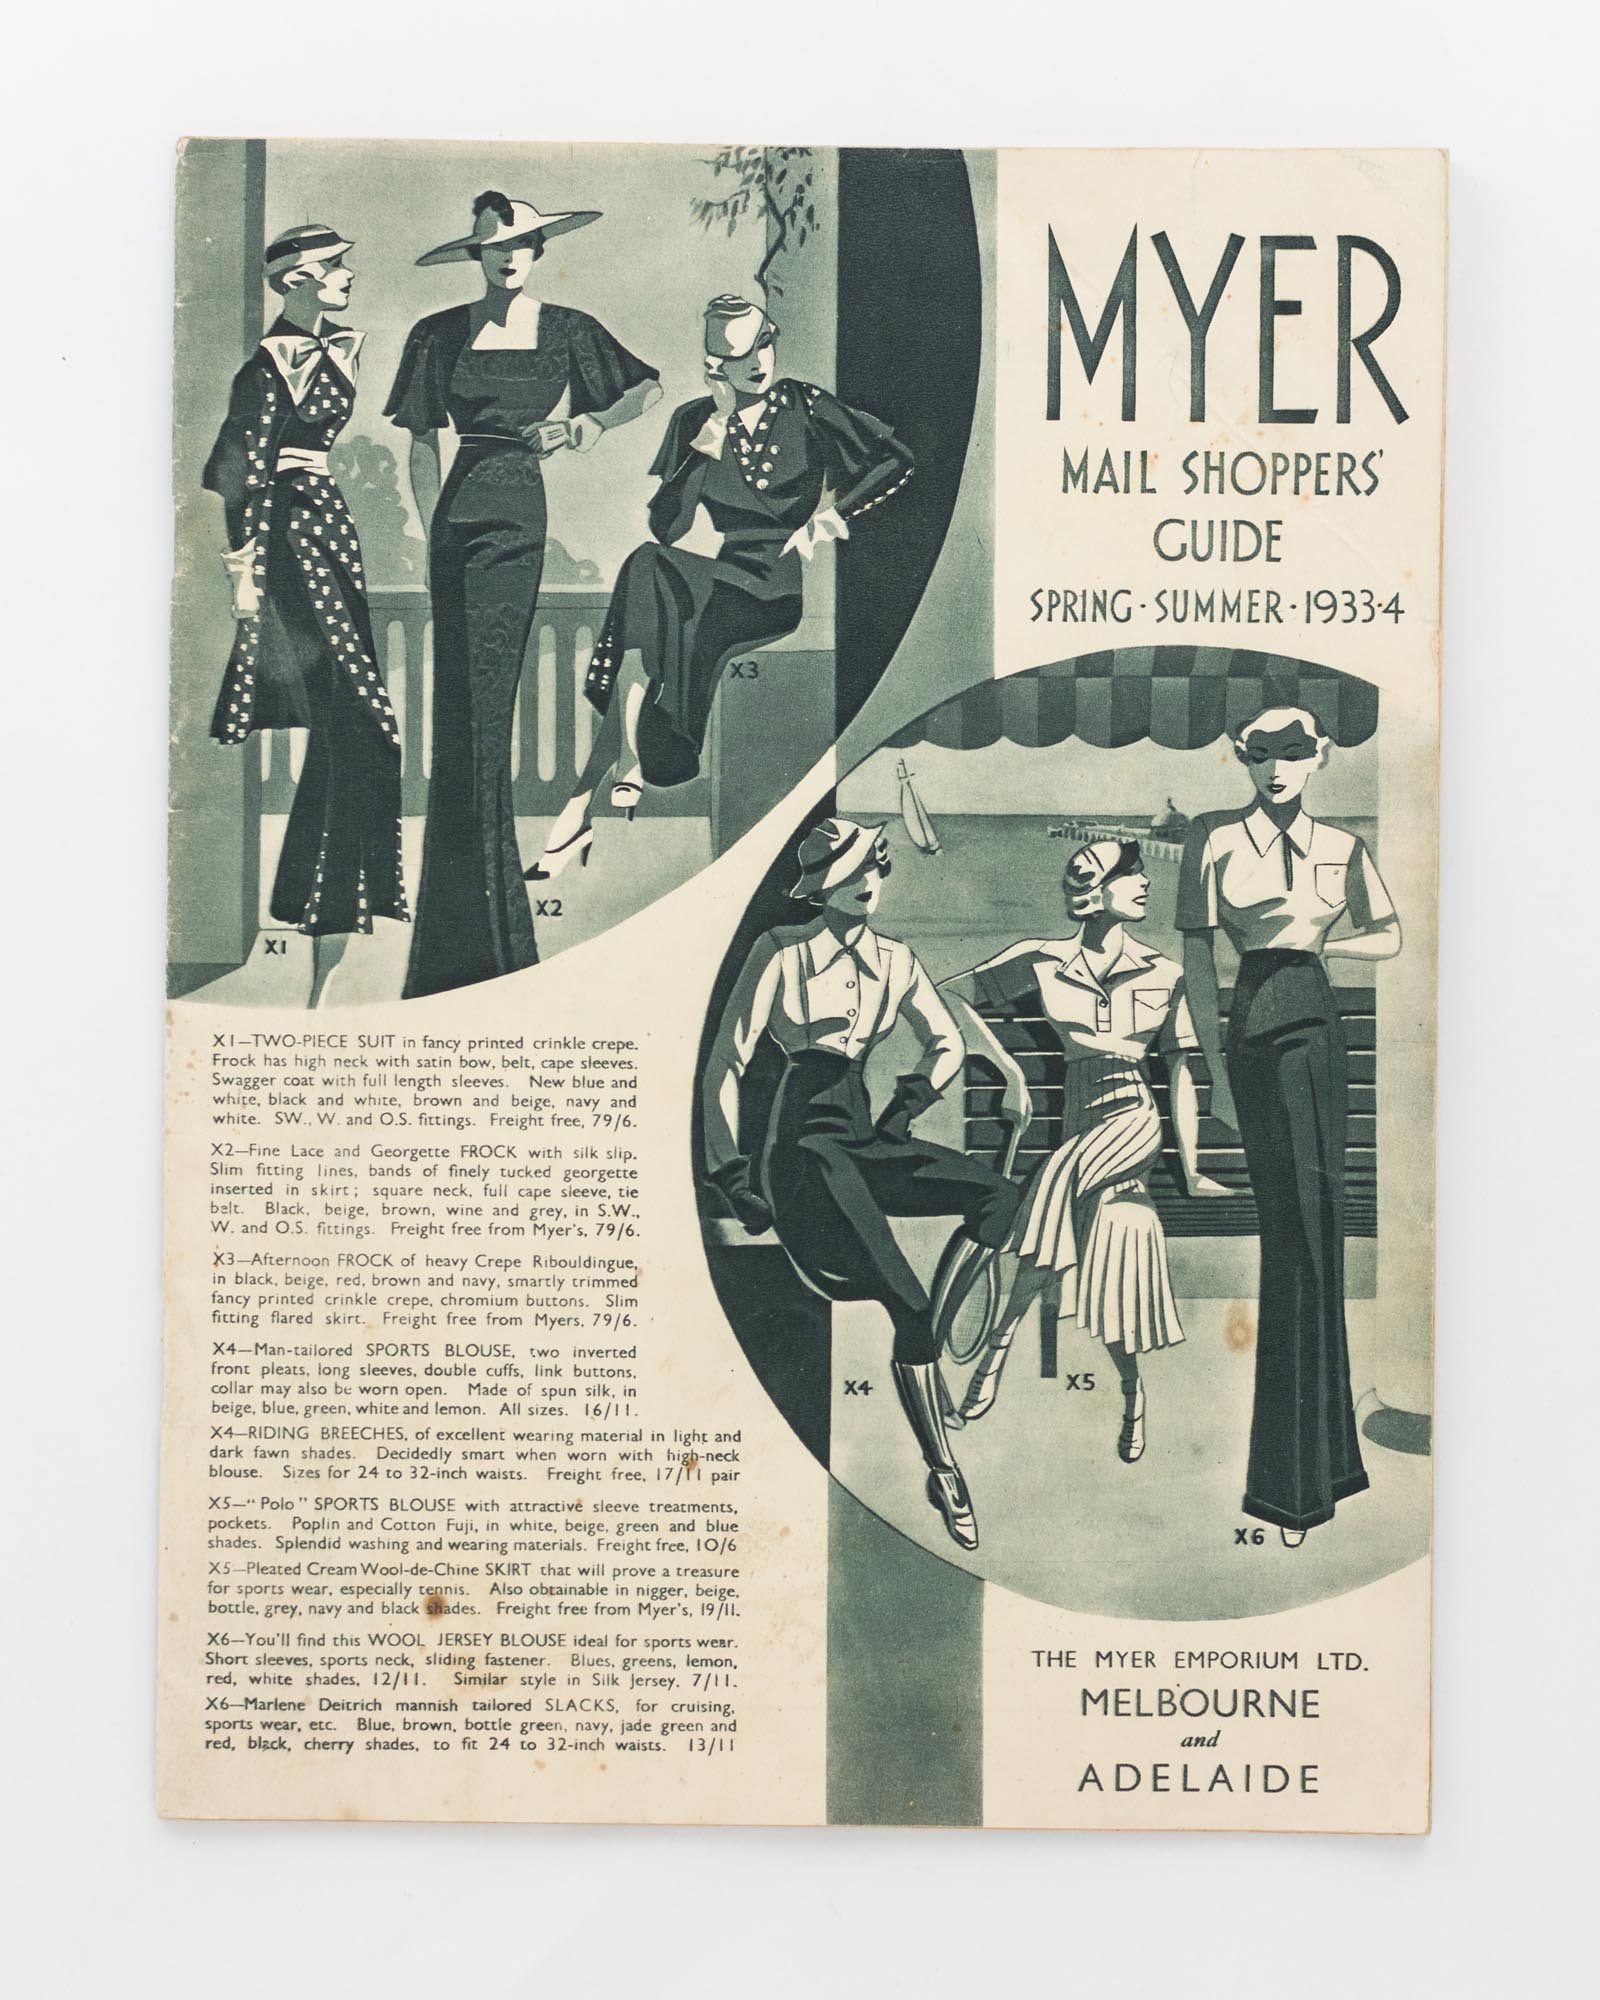 Myer Mail Shoppers' Guide. Spring-Summer, 1933-4 cover title